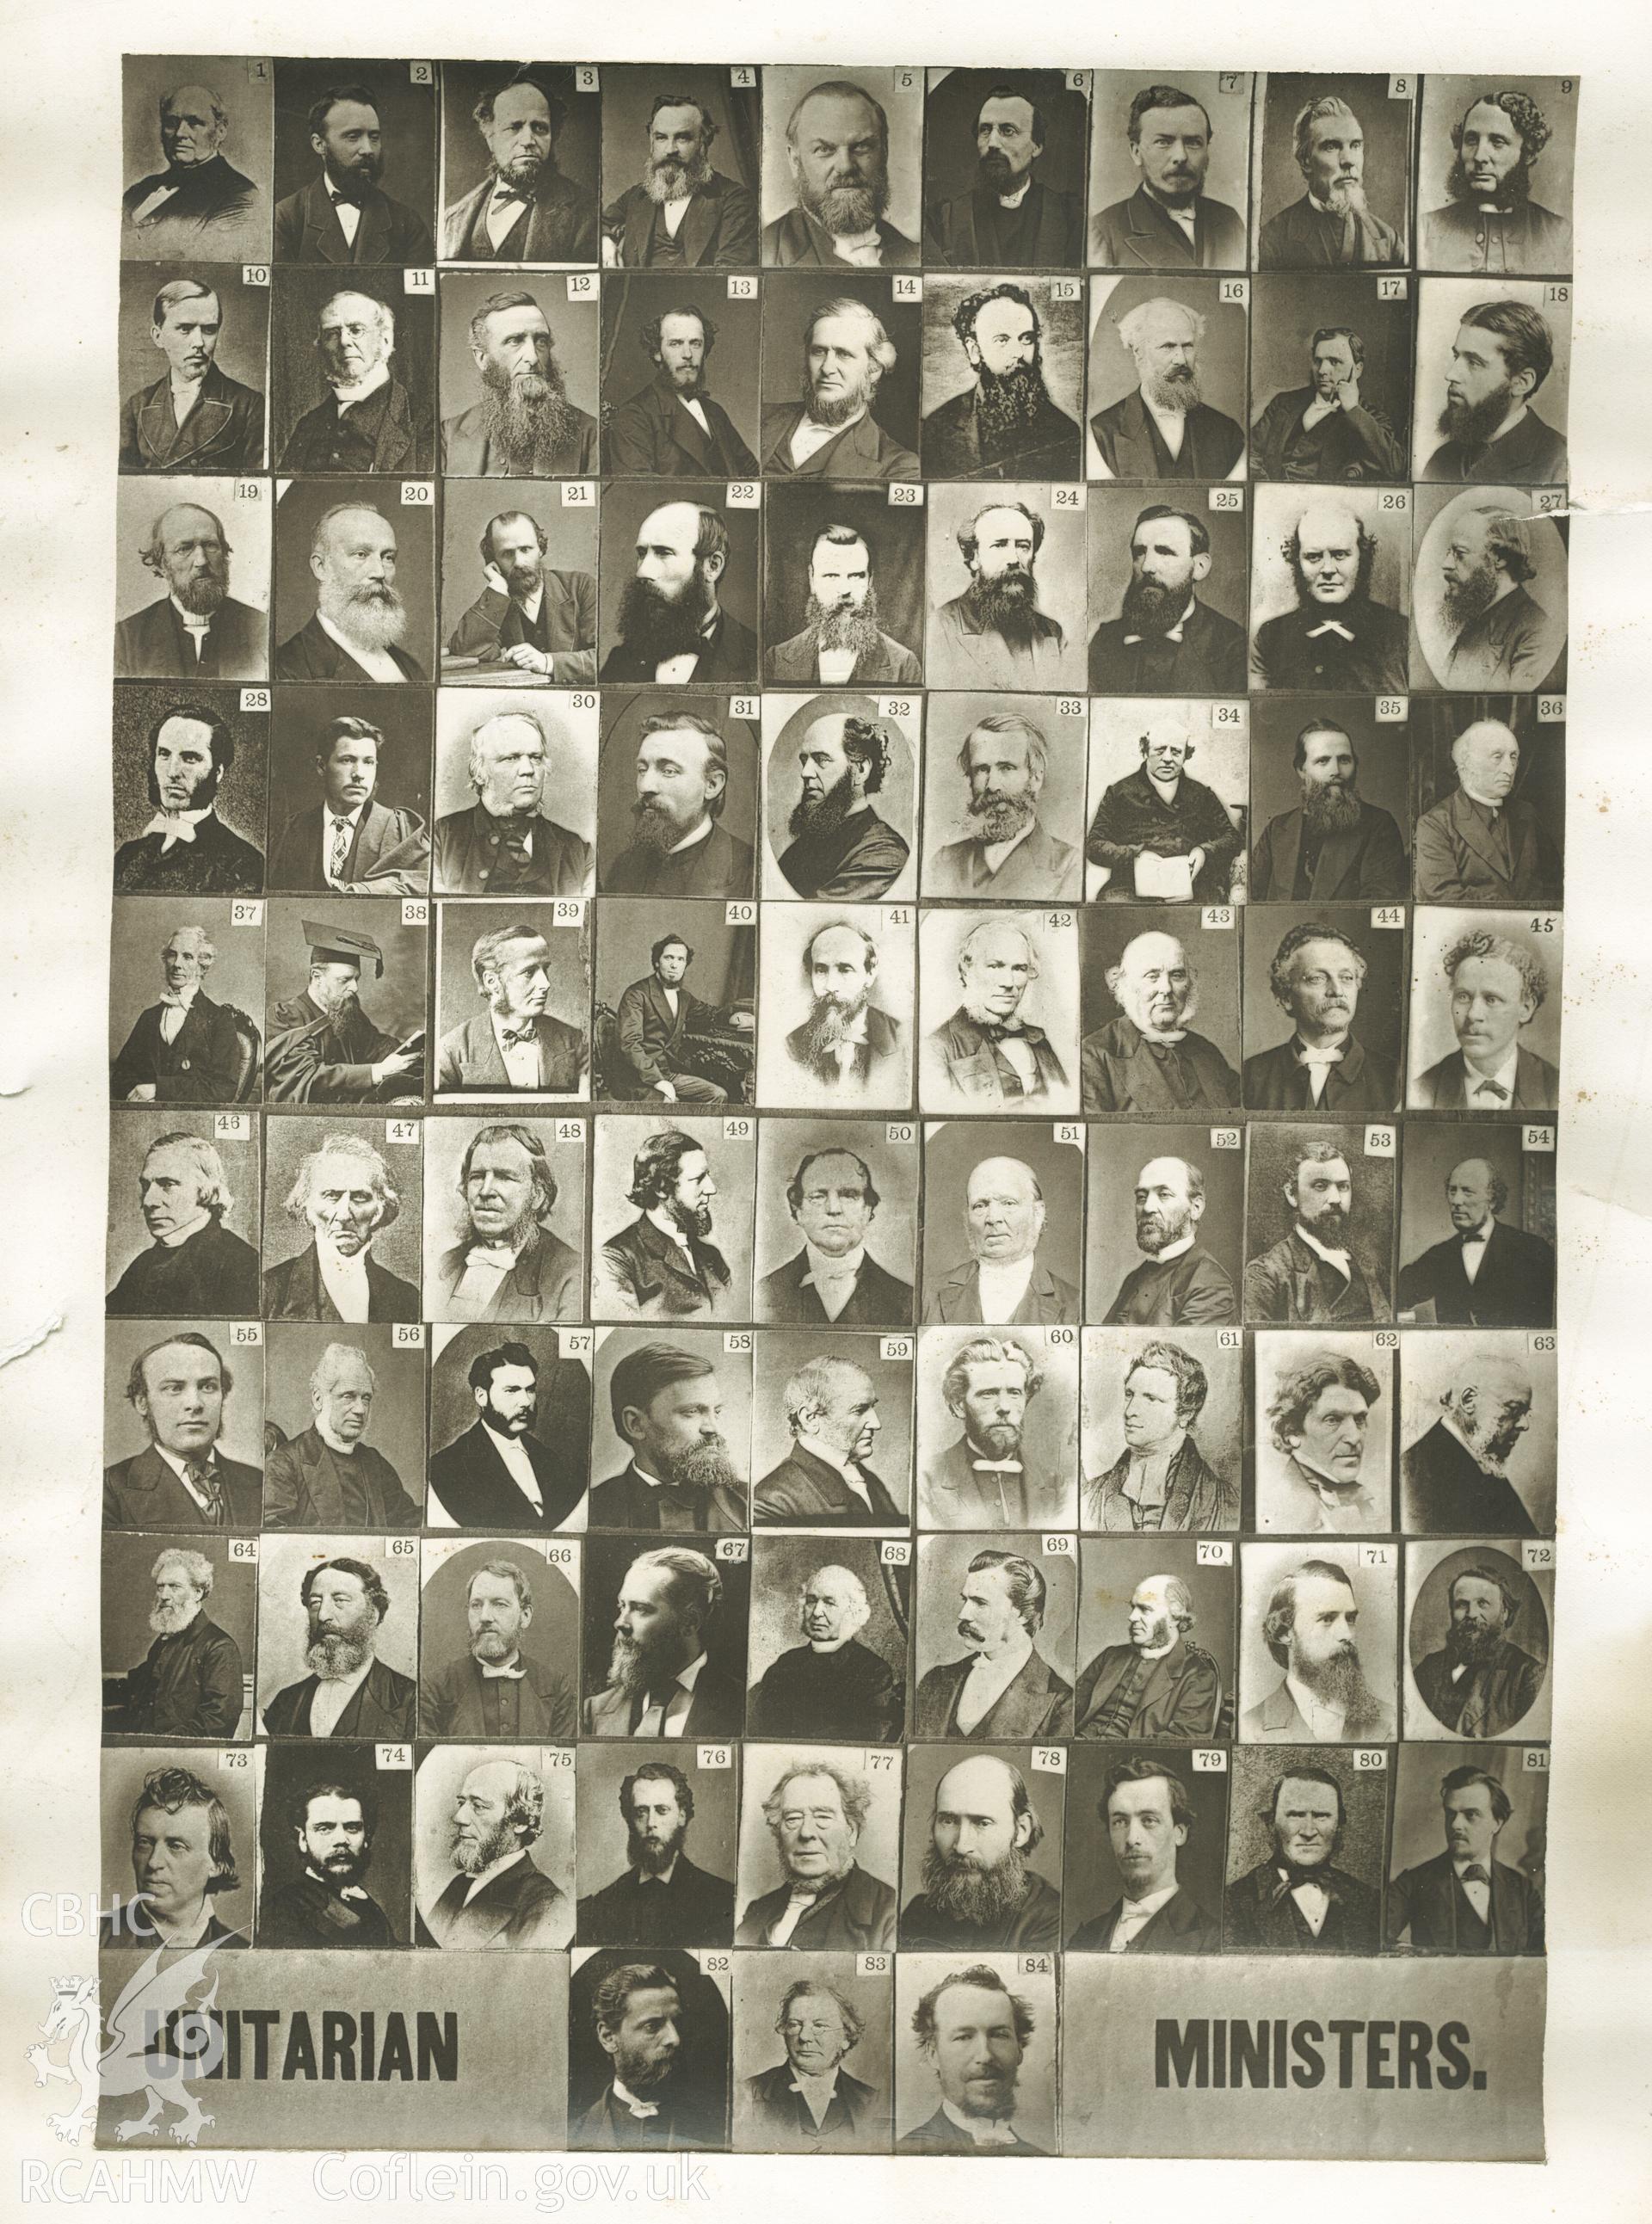 84 minature portraits of the Unitarian Ministers of England and Wales. Donated to the RCAHMW during the Digital Dissent Project.